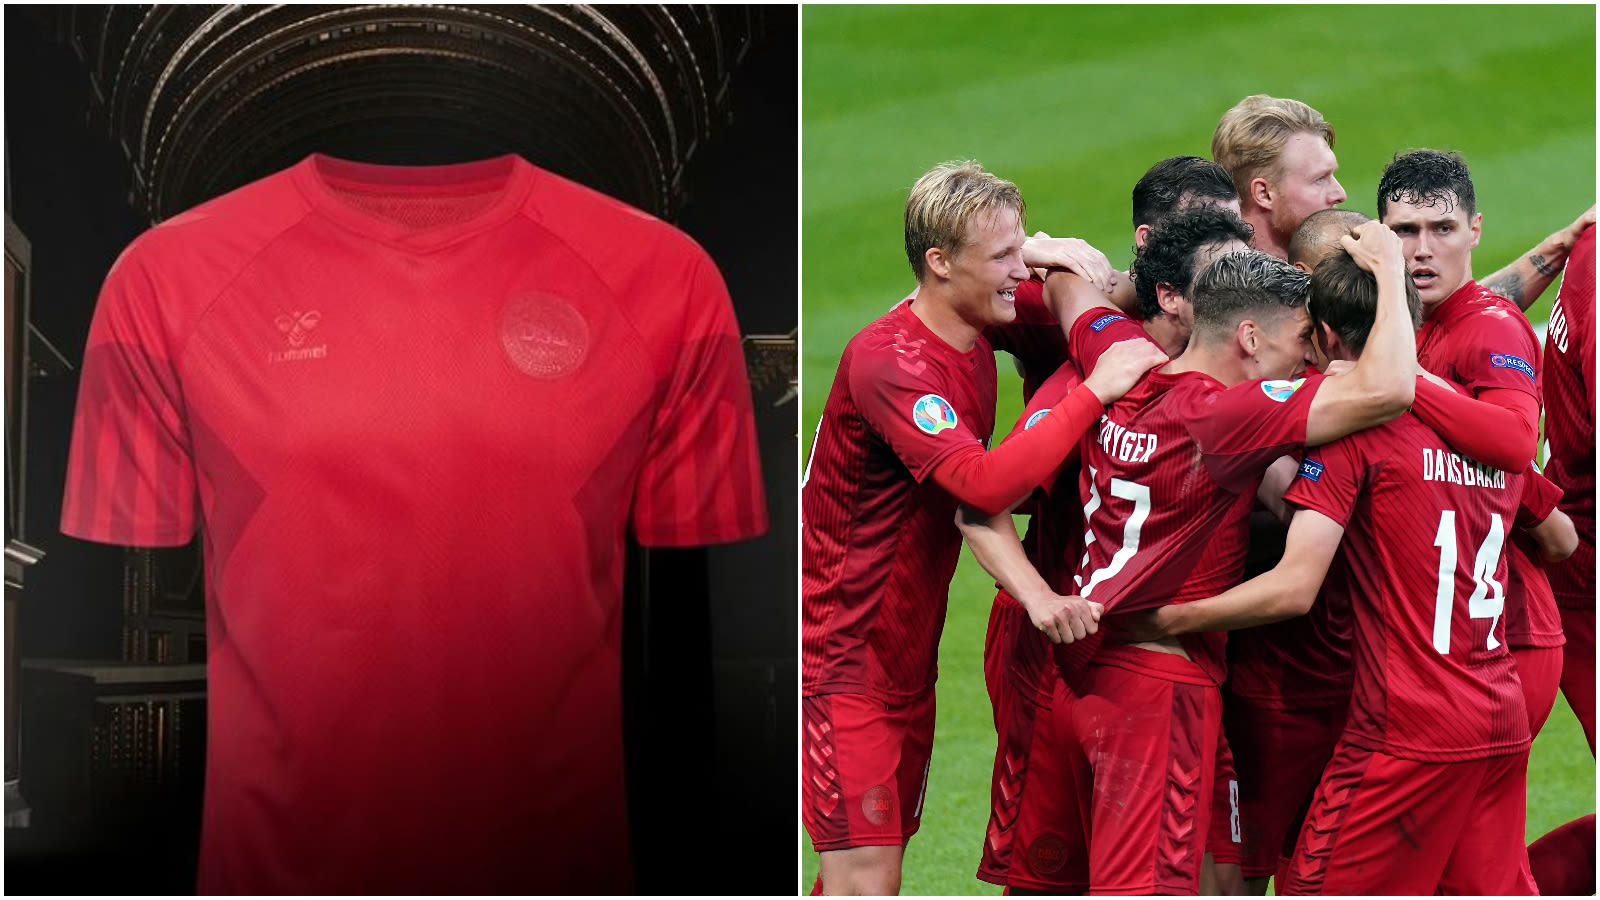 FIFA denies Denmark's request to wear shirts with human rights